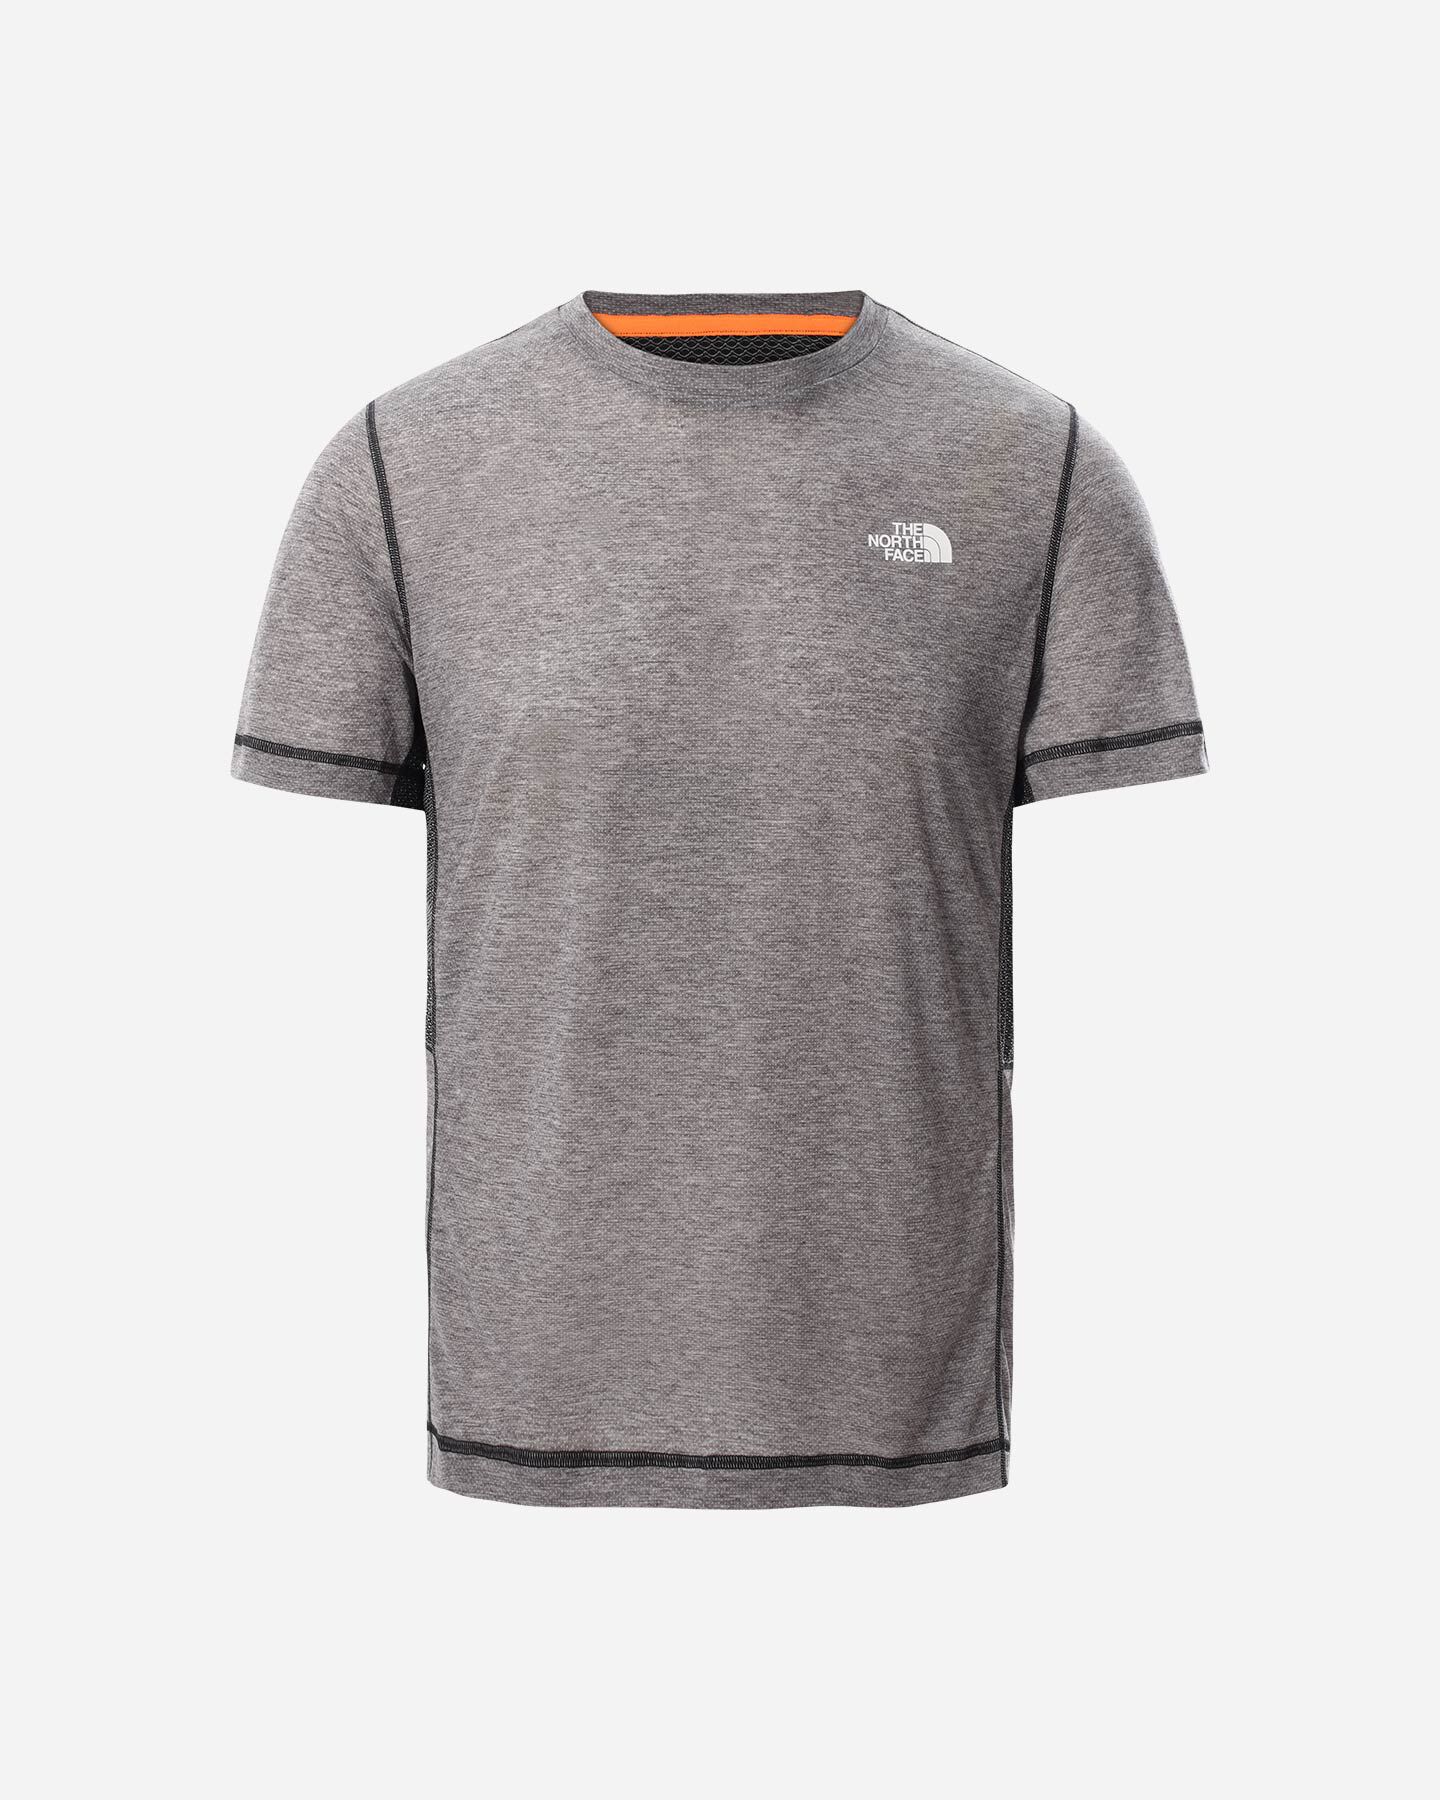  T-Shirt THE NORTH FACE CIRCADIAN M S5293211|WVV|S scatto 0